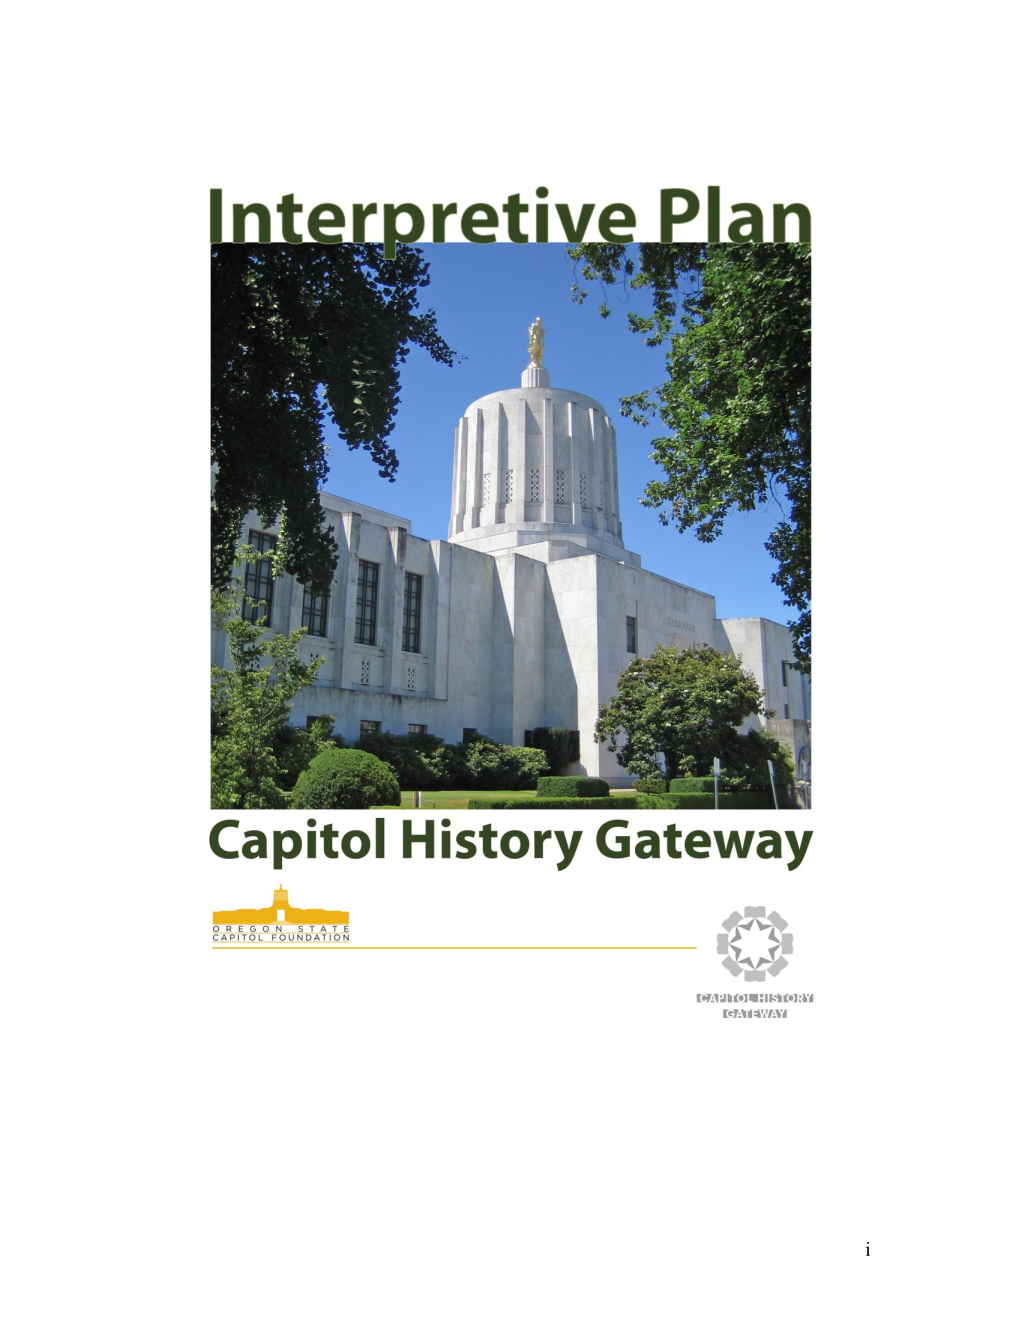 Interpretive Plan for the Capitol History Gateway